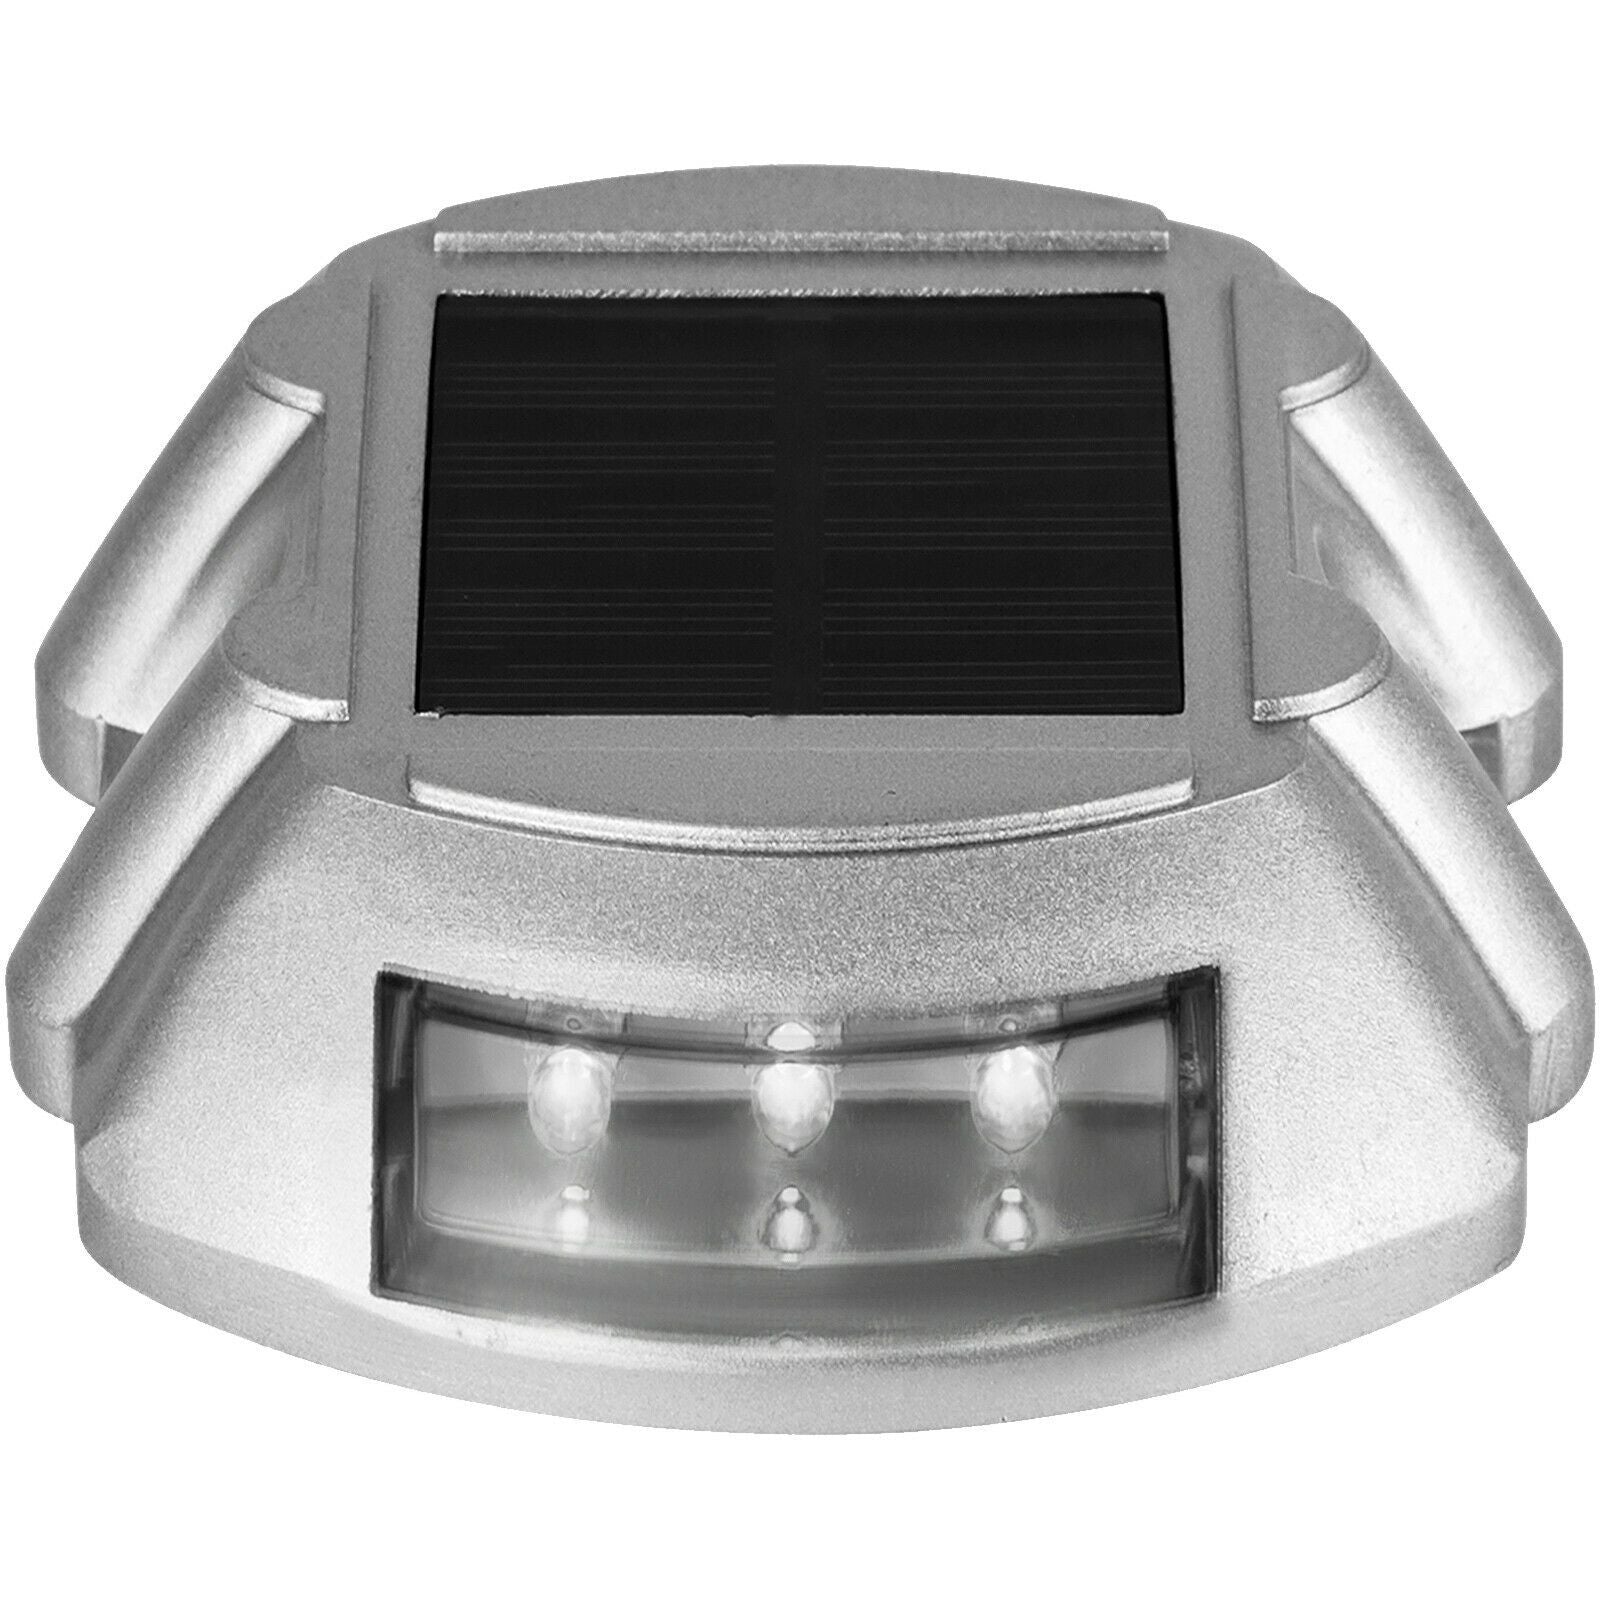 Outdoor LED Low Voltage Solar Pathway Lights 12 Pack - Westfield Retailers